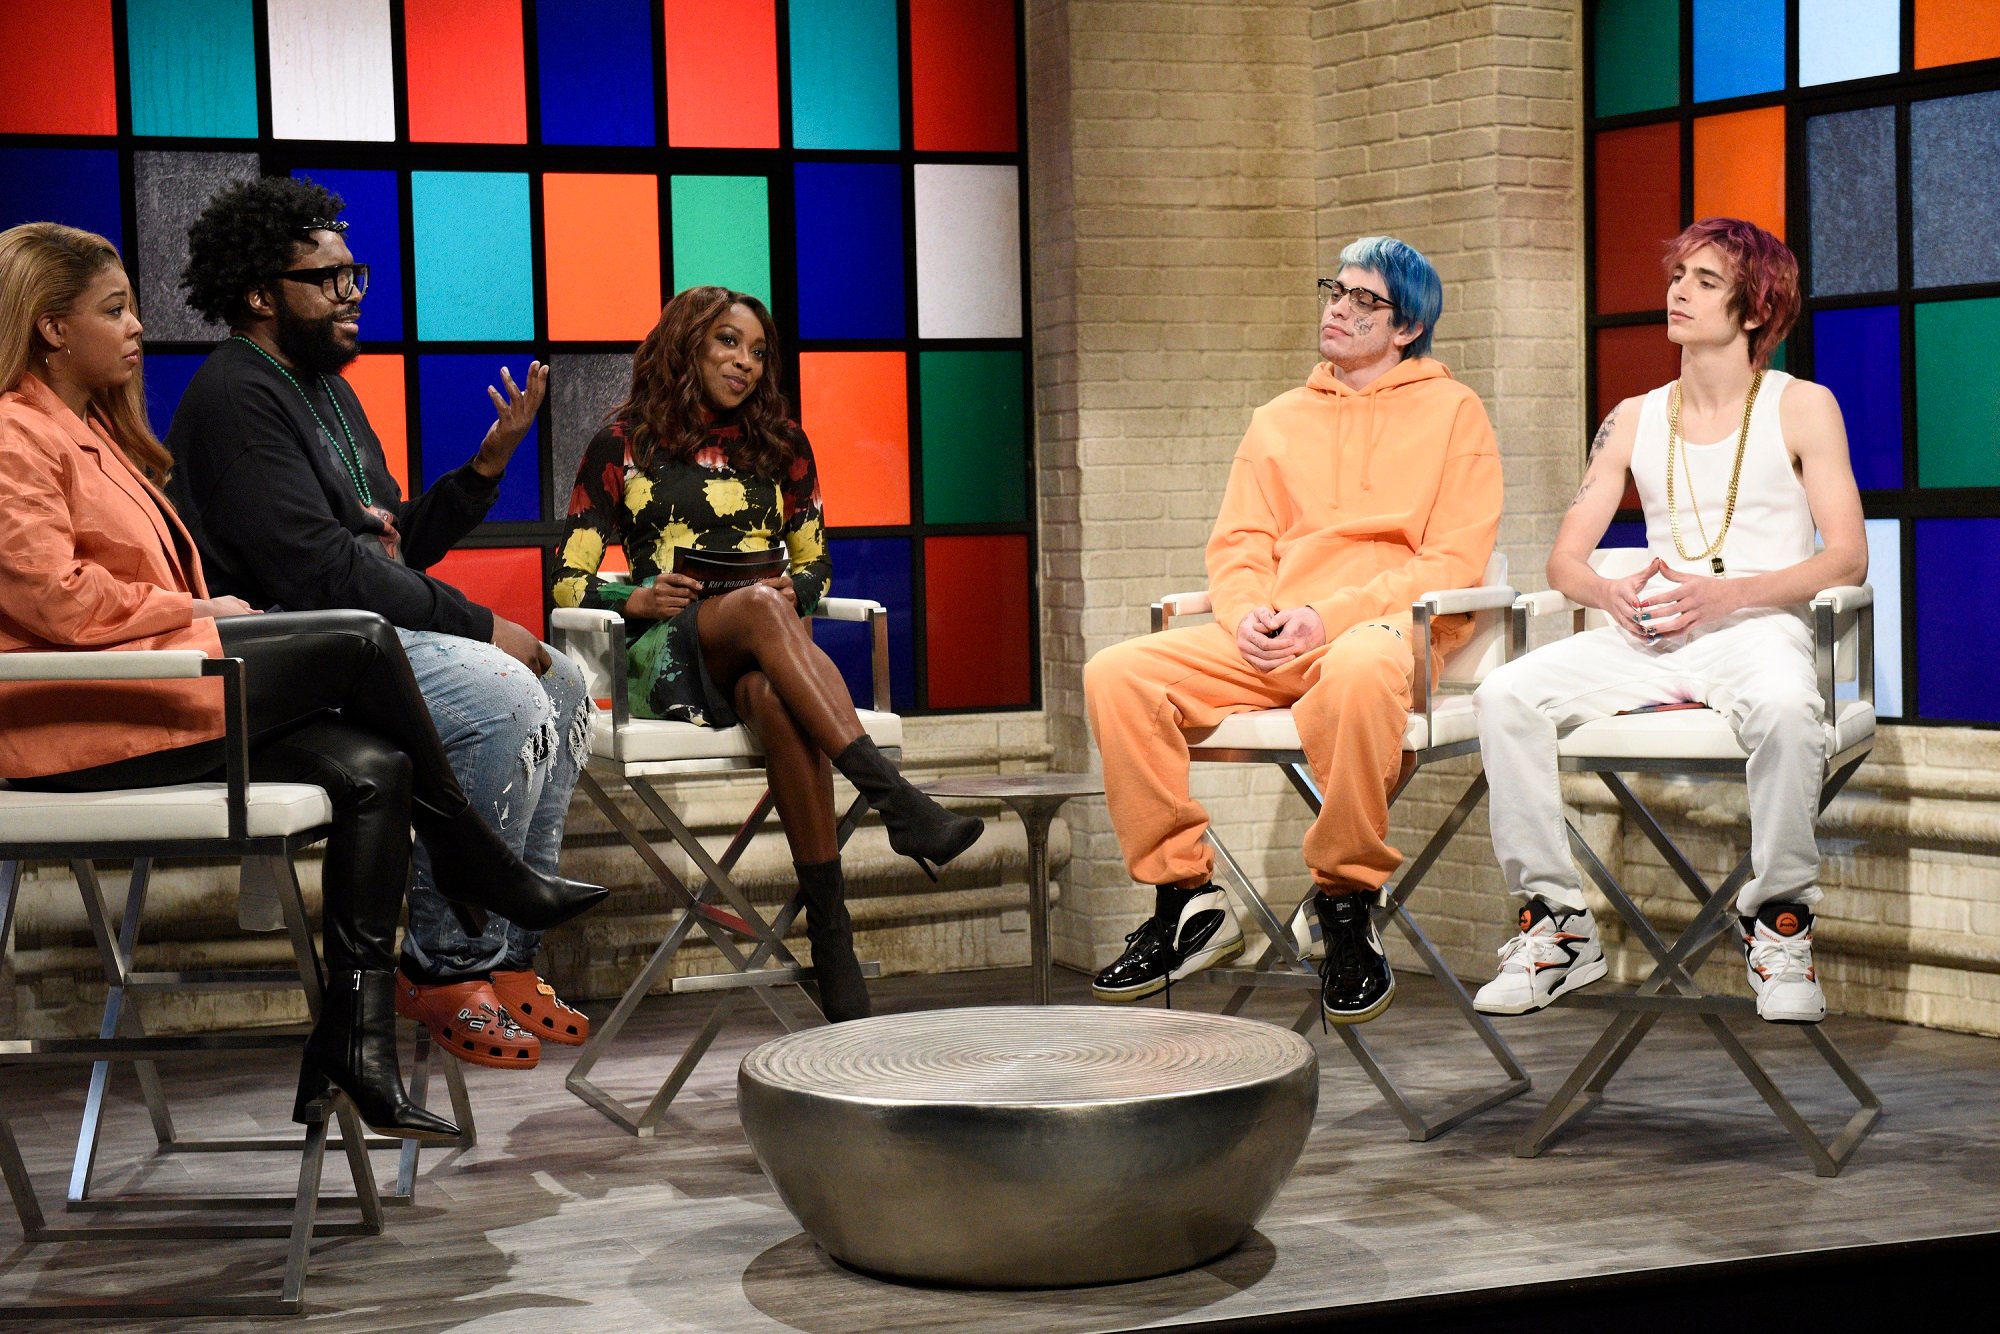 Punkie Johnson as Queen Latifah, Questlove as himself, Ego Nwodim as Nunya Business, Pete Davidson as Guaplord and Timothée Chalamet as $mokecheddathaassgetta during a sketch on 'Saturday Night Live'